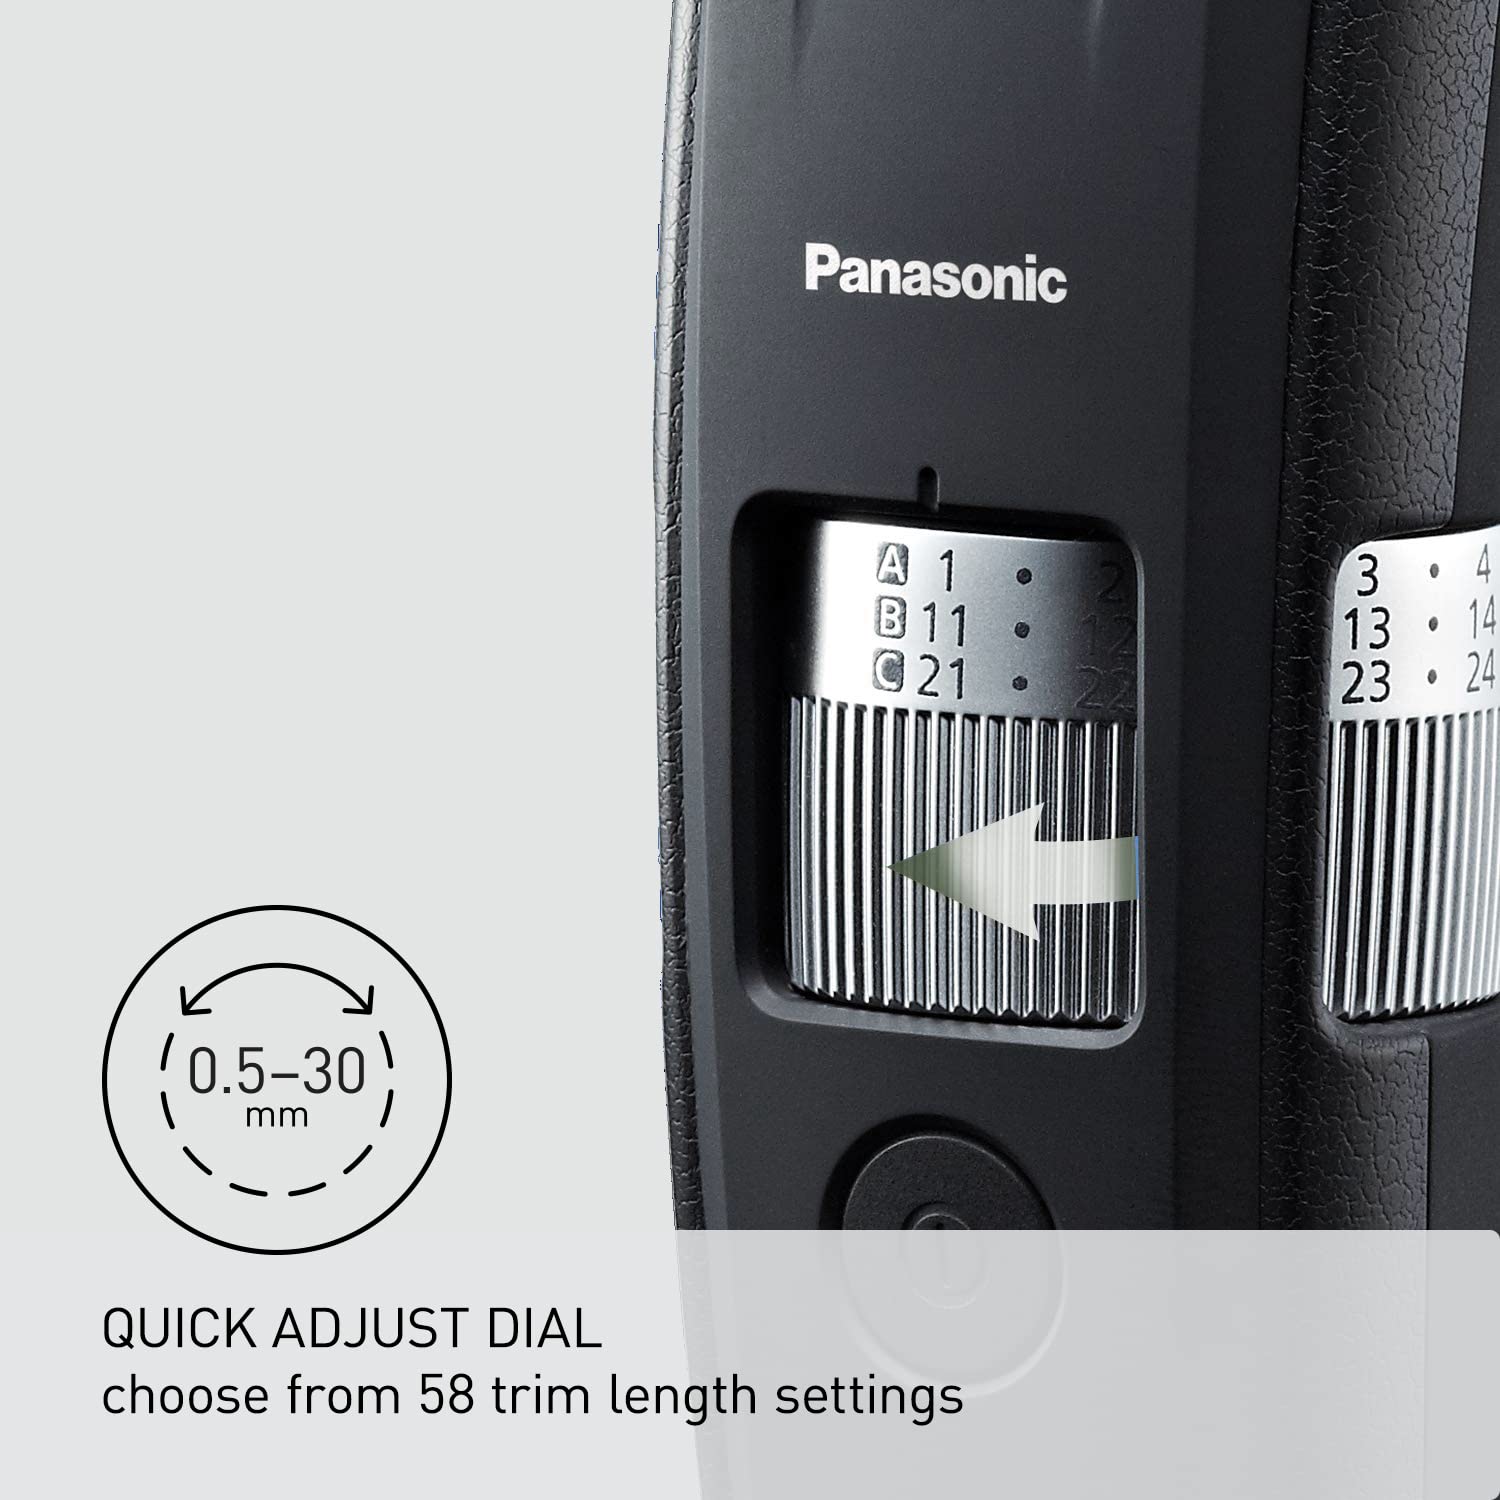 Panasonic Long Beard Trimmer for Men, 58 Length Settings and 4 Attachments for Cutting and Detailing, Cordless or Corded Operation – ER-GB96-K (Black) : Beauty & Personal Care